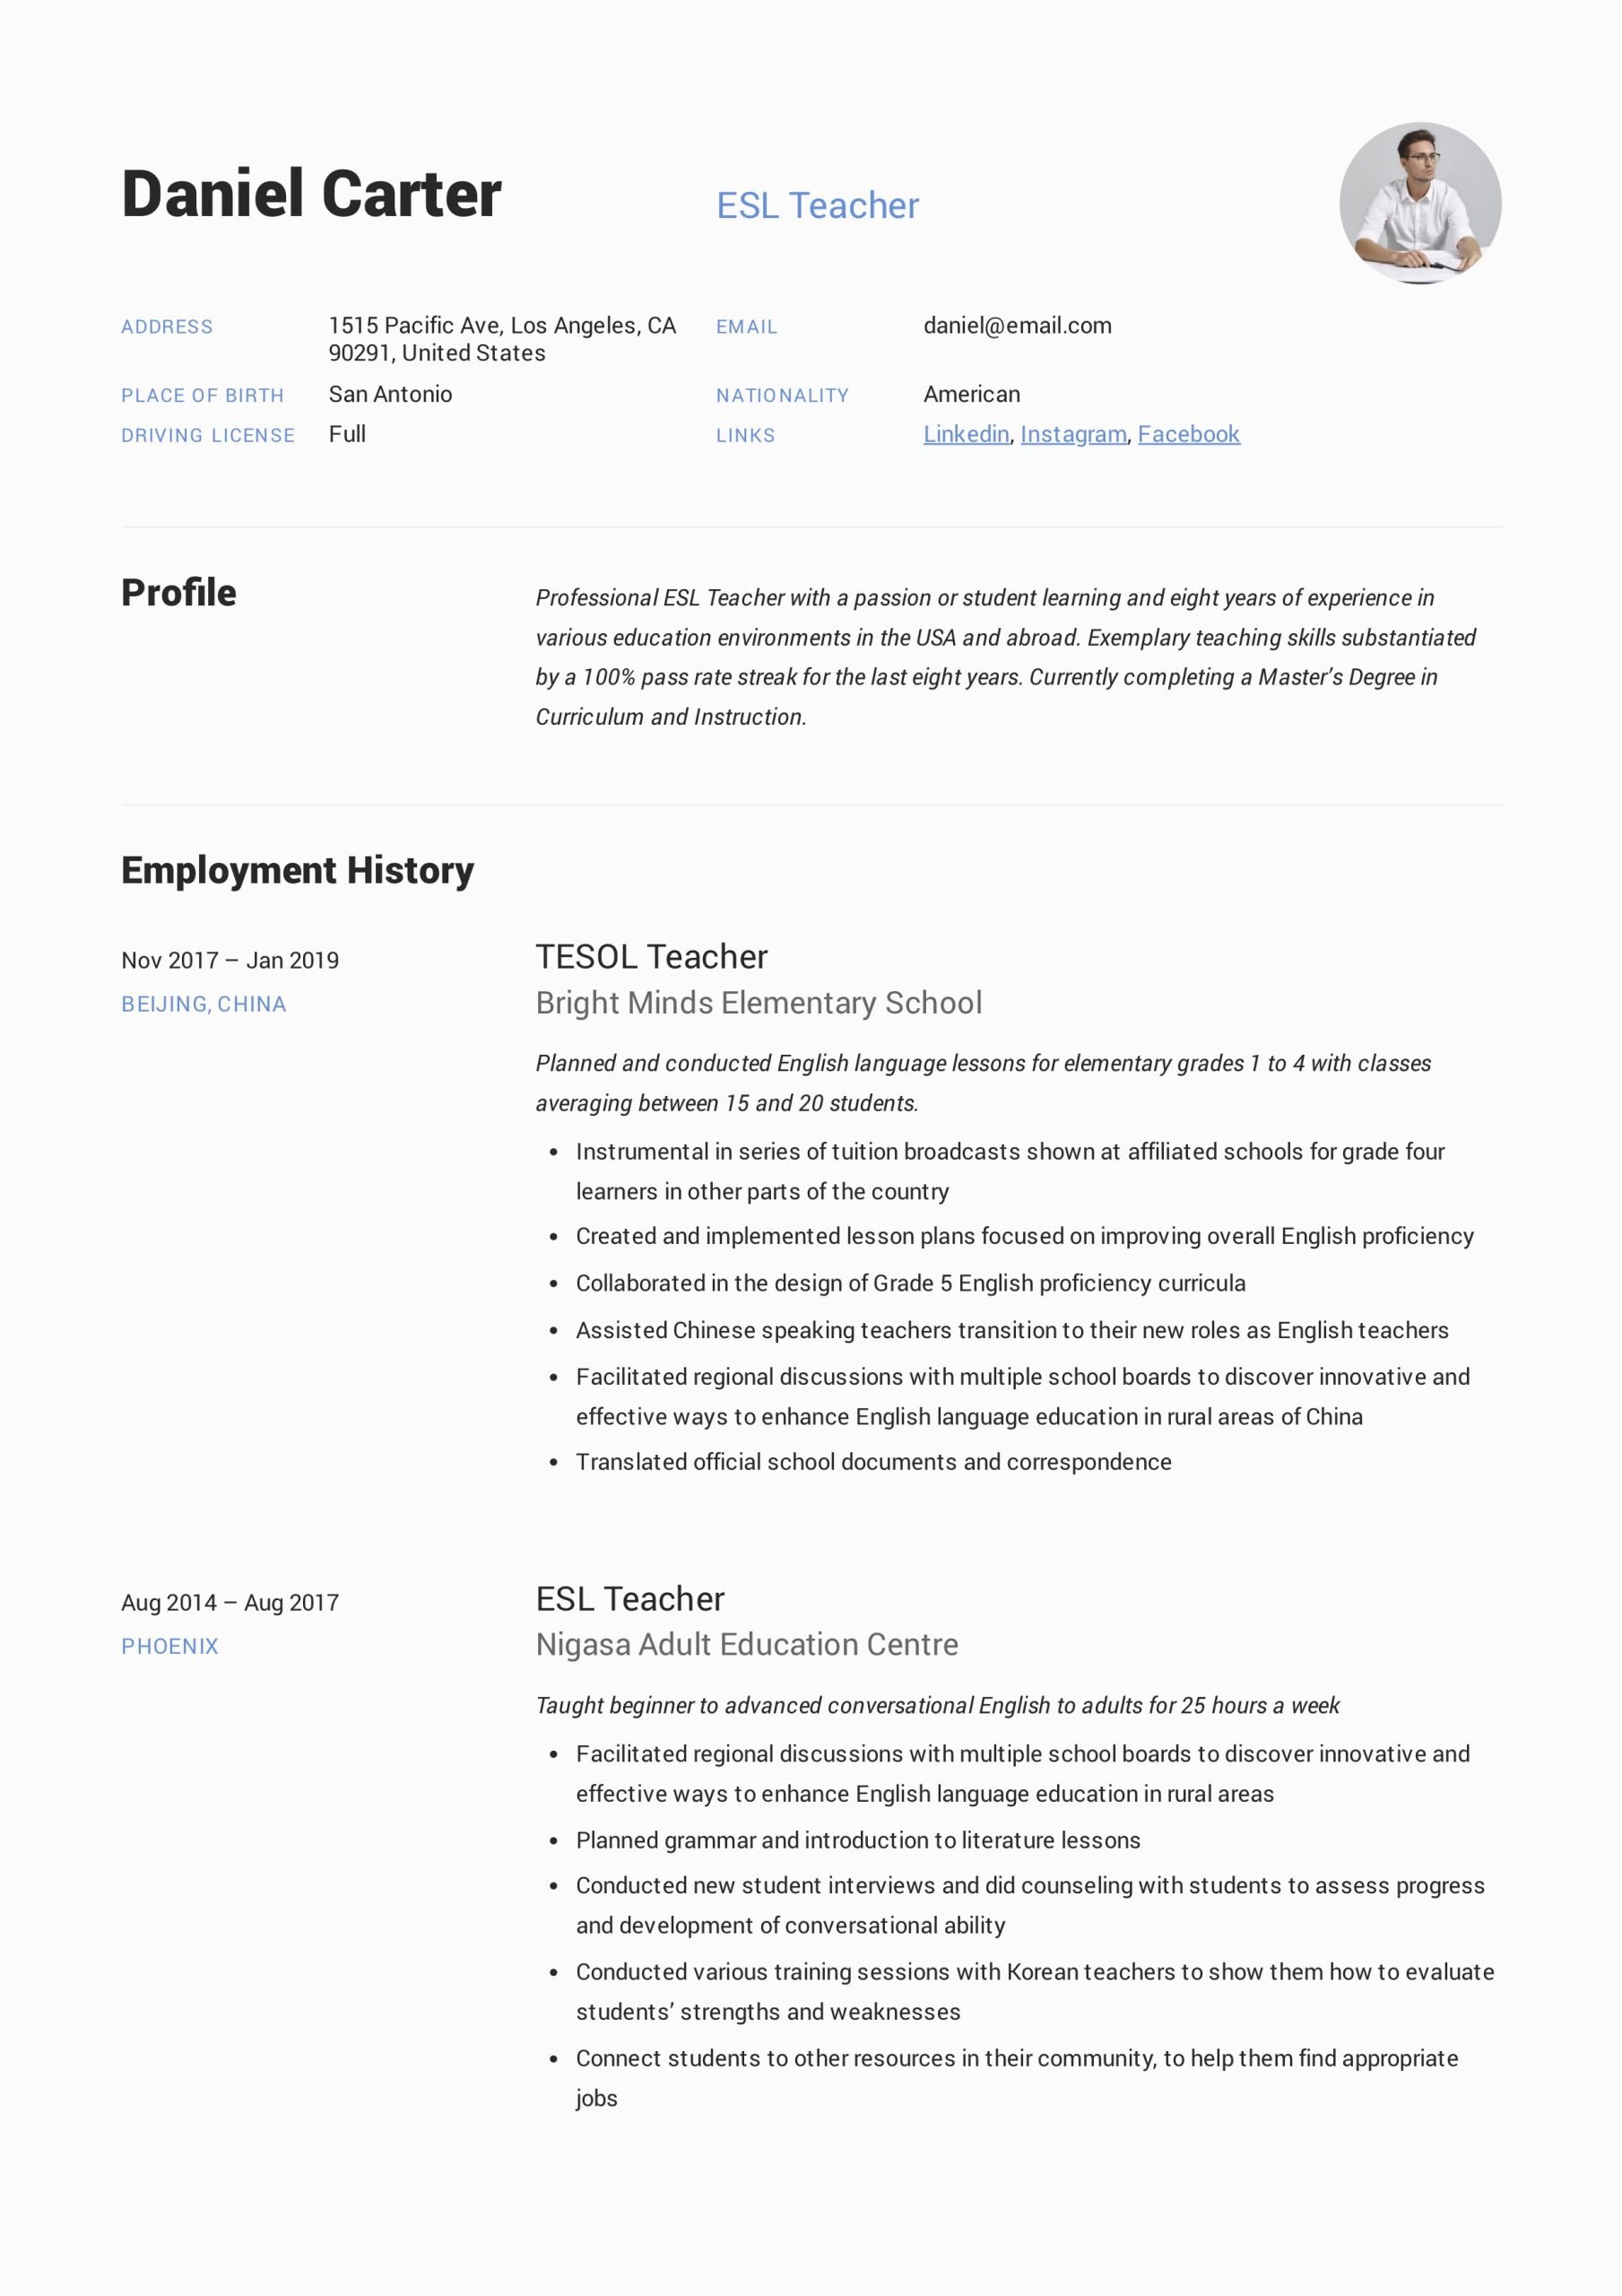 Sample Resume for Online English Tutor without Experience Esl Teacher Resume Sample & Writing Guide